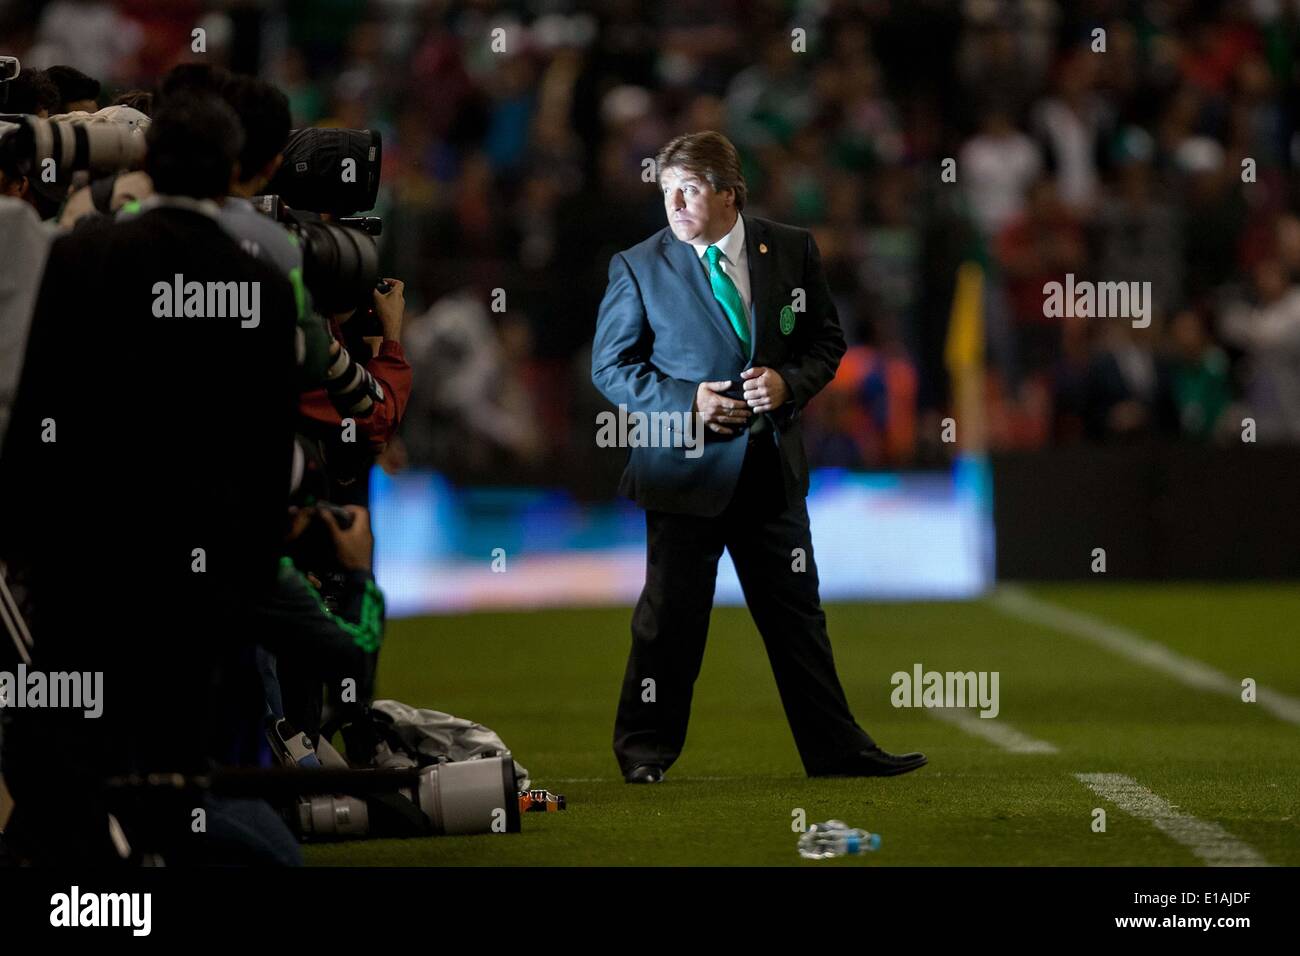 Mexico City, Mexico. 28th May, 2014. Mexico's national soccer team's coach Miguel Herrera reacts before the international friendly match between Mexico and Israel, at the Azteca Stadium in Mexico City, capital of Mexico, on May 28, 2014. Credit:  Pedro Mera/Xinhua/Alamy Live News Stock Photo